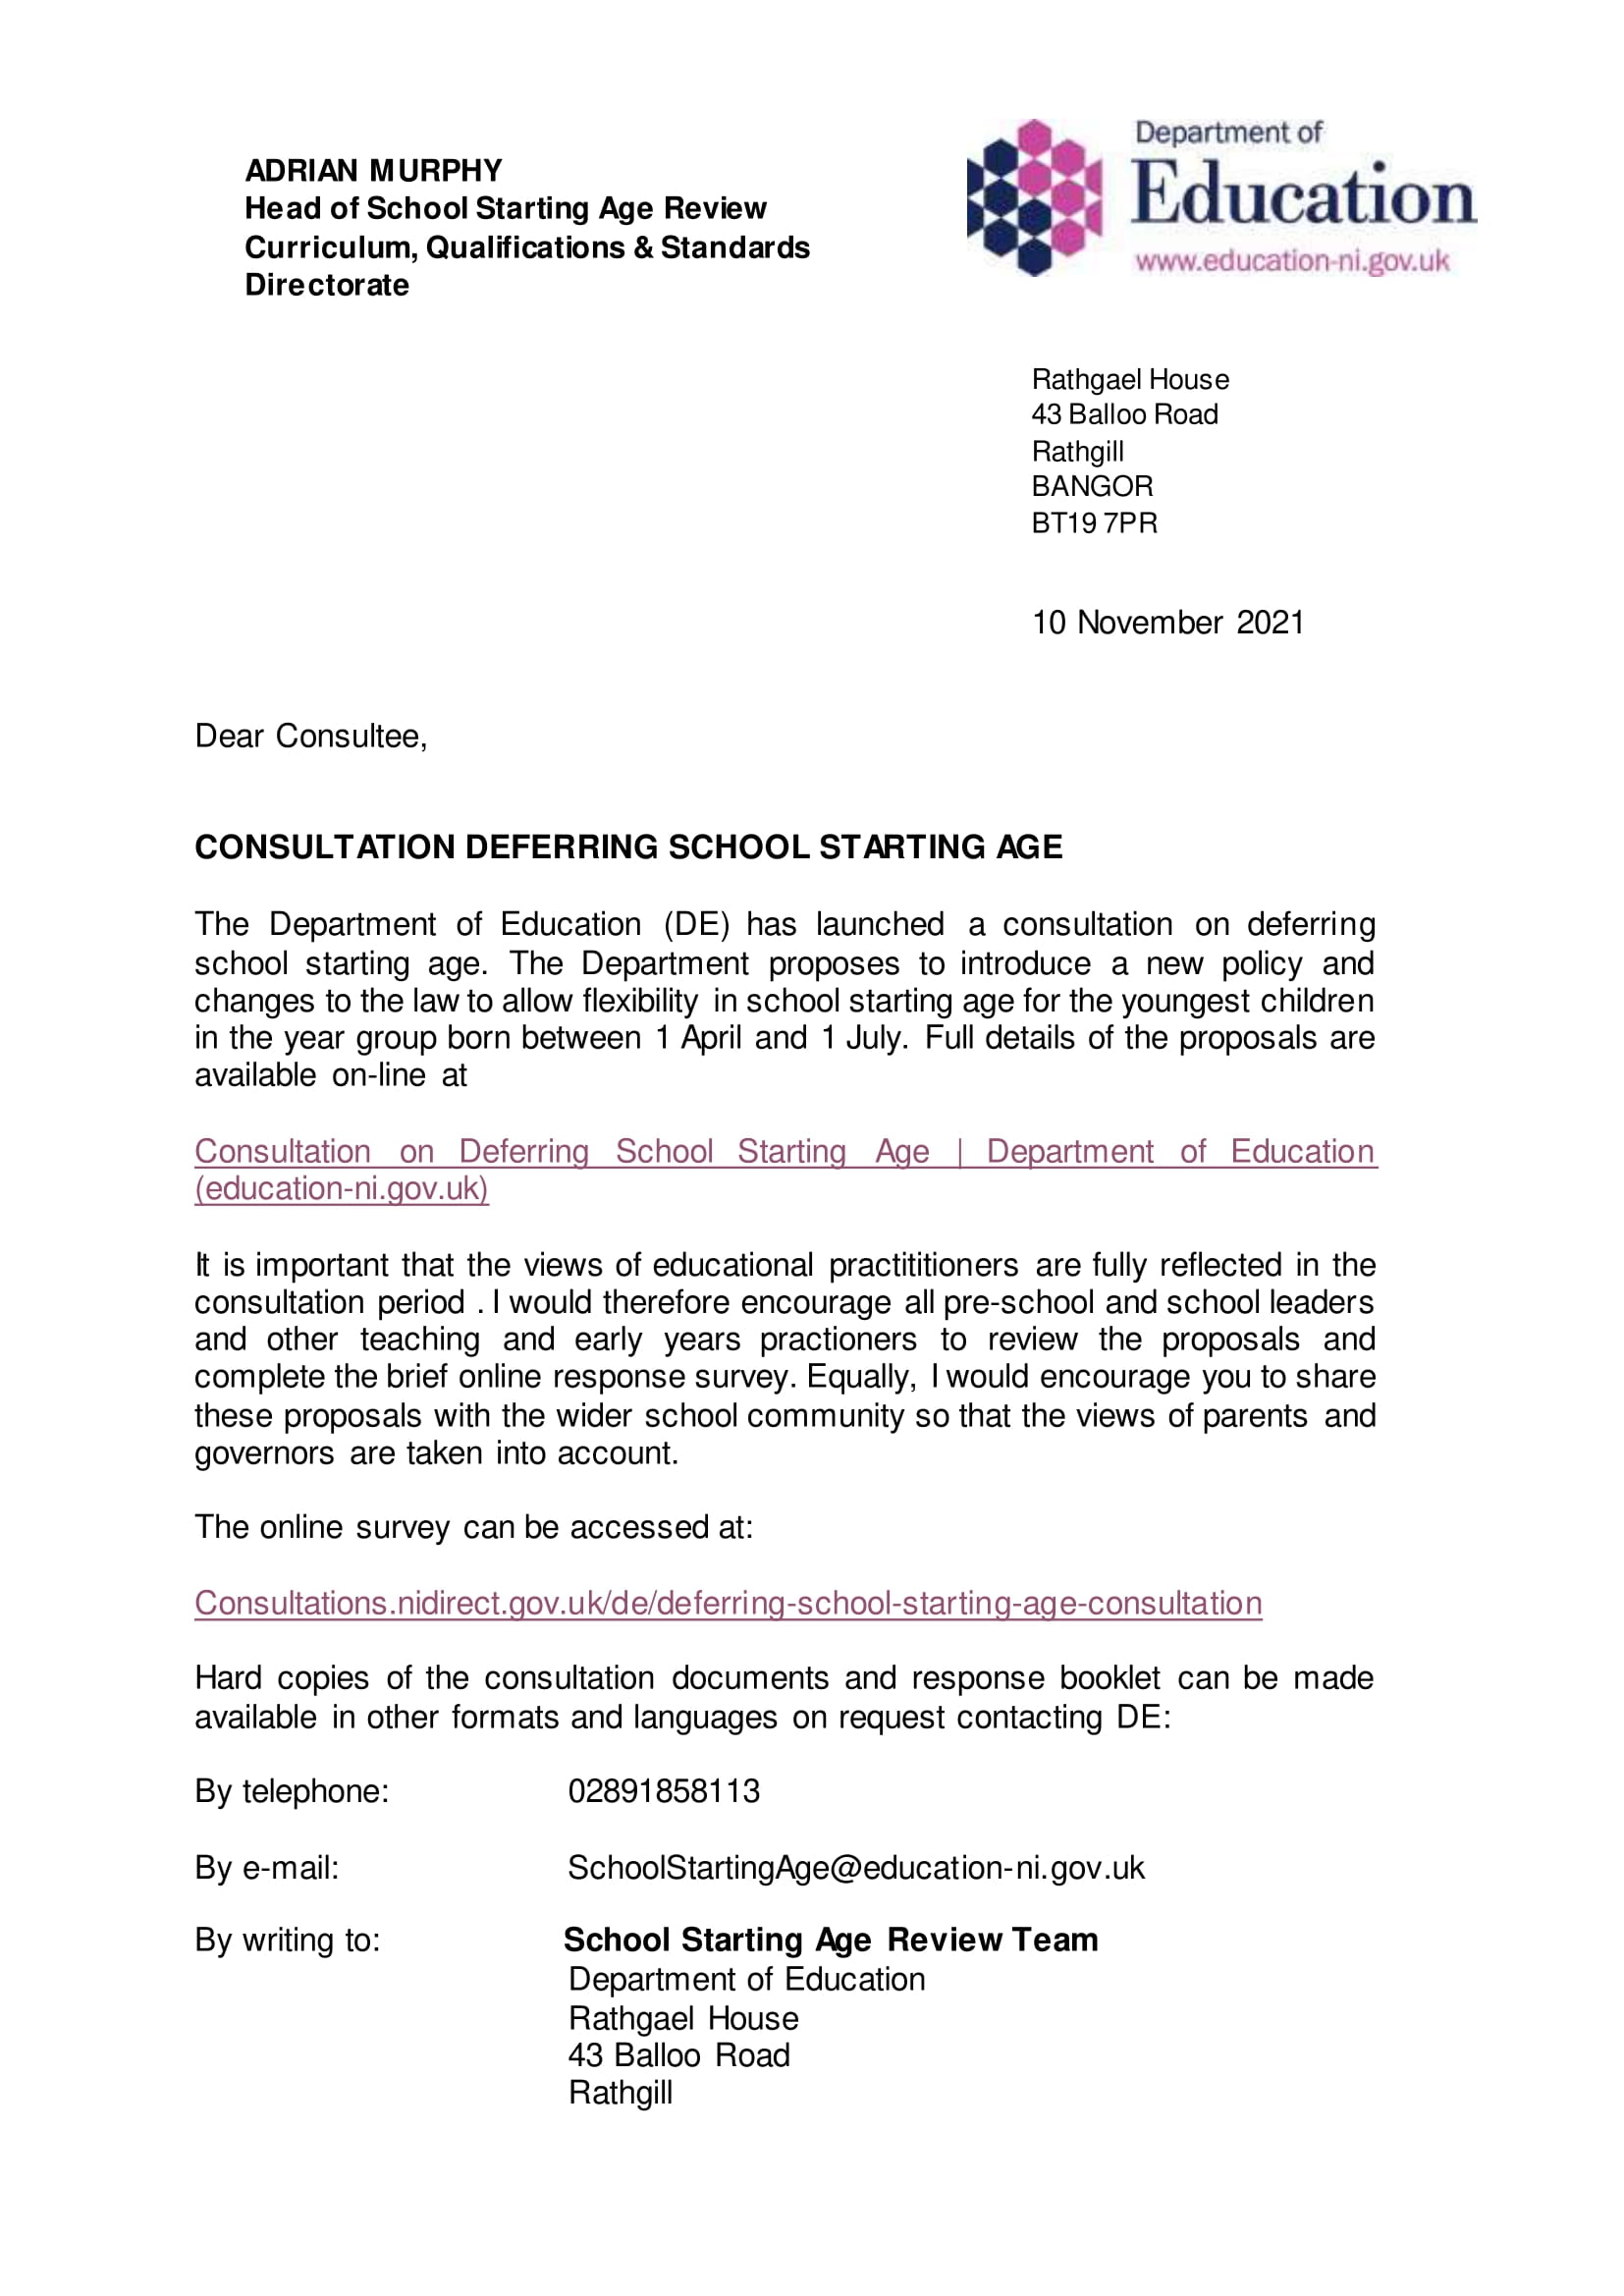 DofE - Letter to Consultee - Consultation on Deferral of School Starting Age